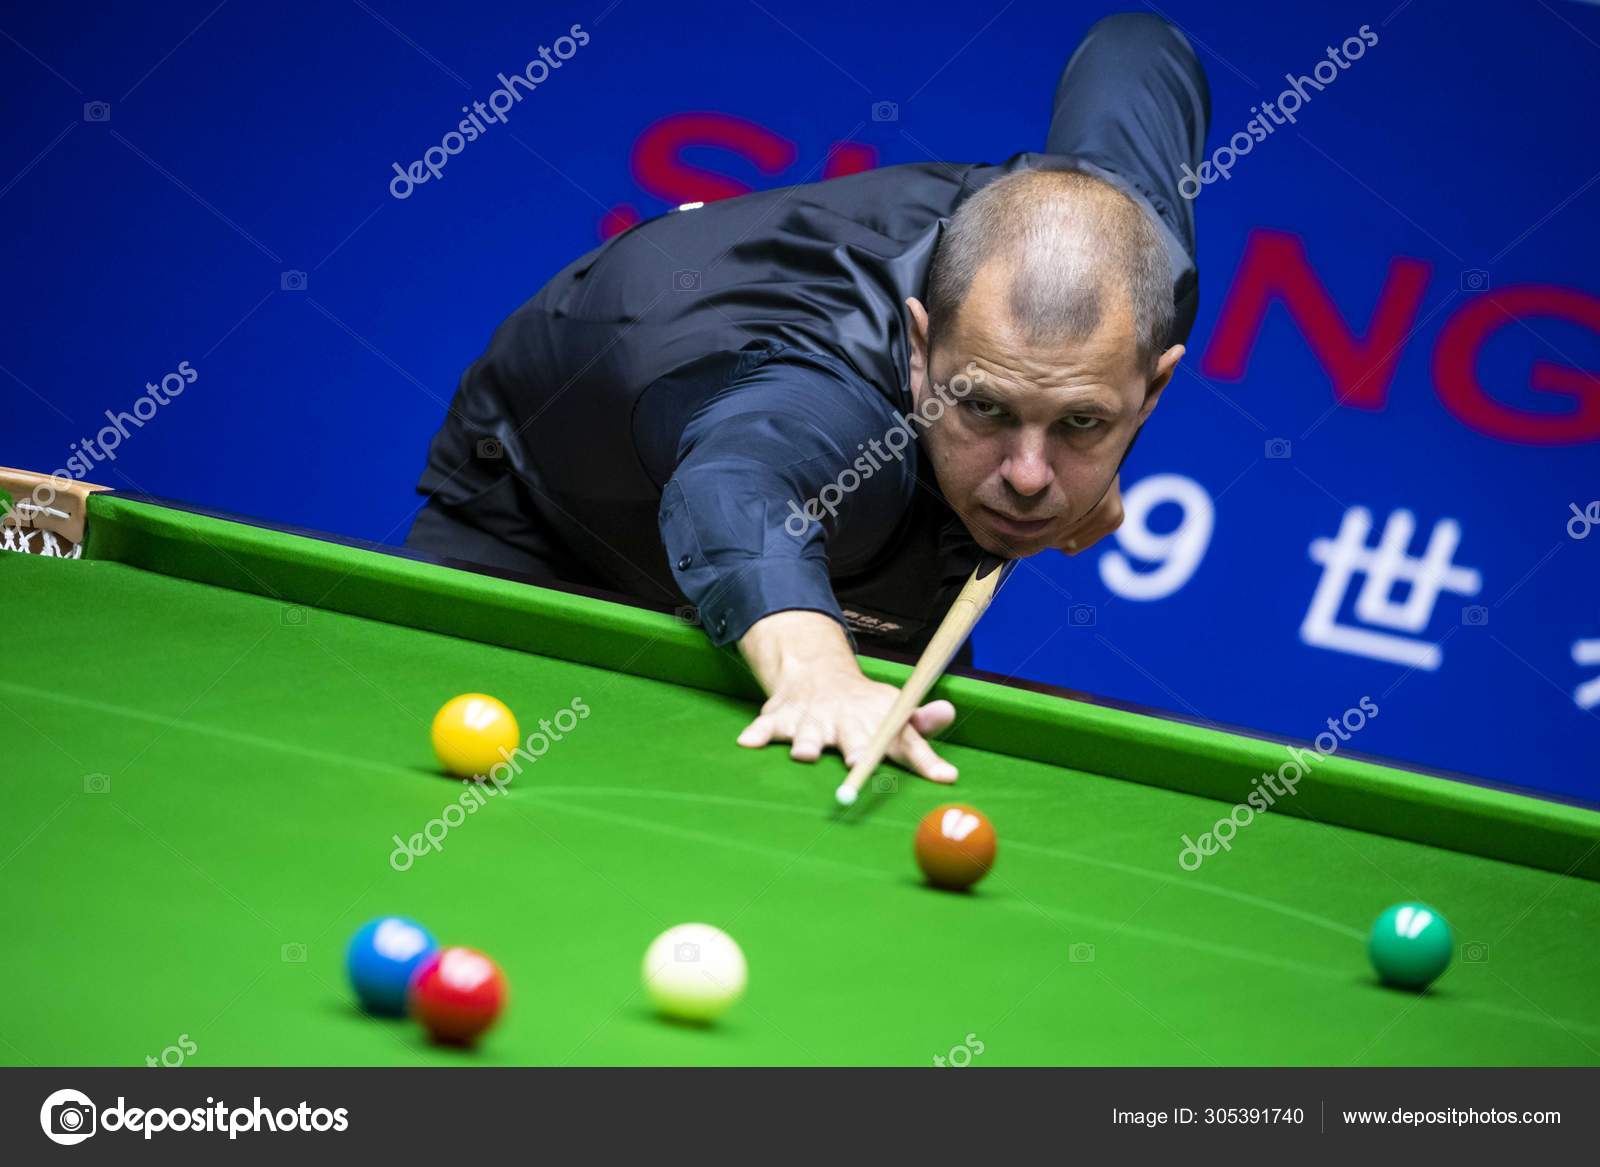 English Professional Snooker Player Barry Hawkins Plays Shot 2019 Snooker